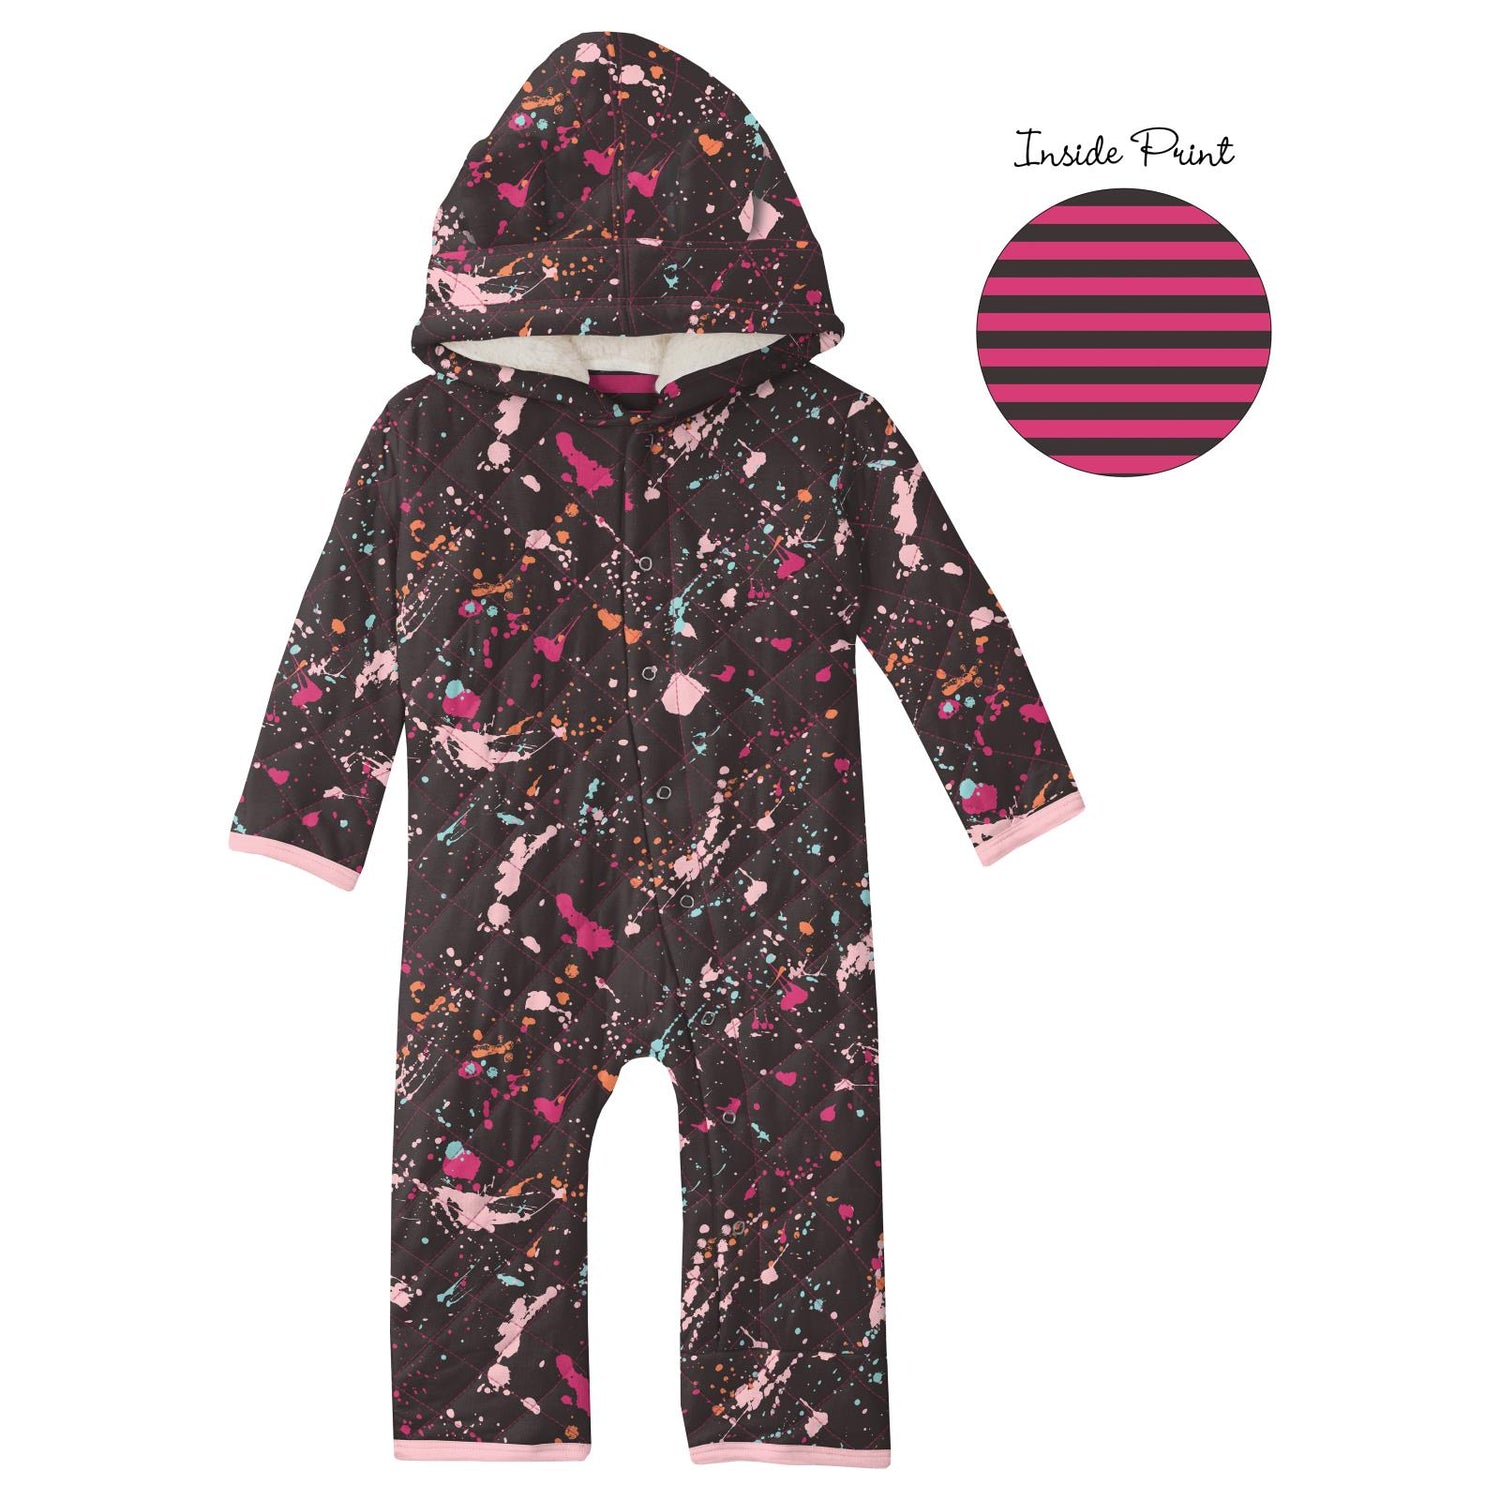 Print Quilted Hoodie Coverall with Sherpa-Lined Hood in Calypso Splatter Paint/Awesome Stripe